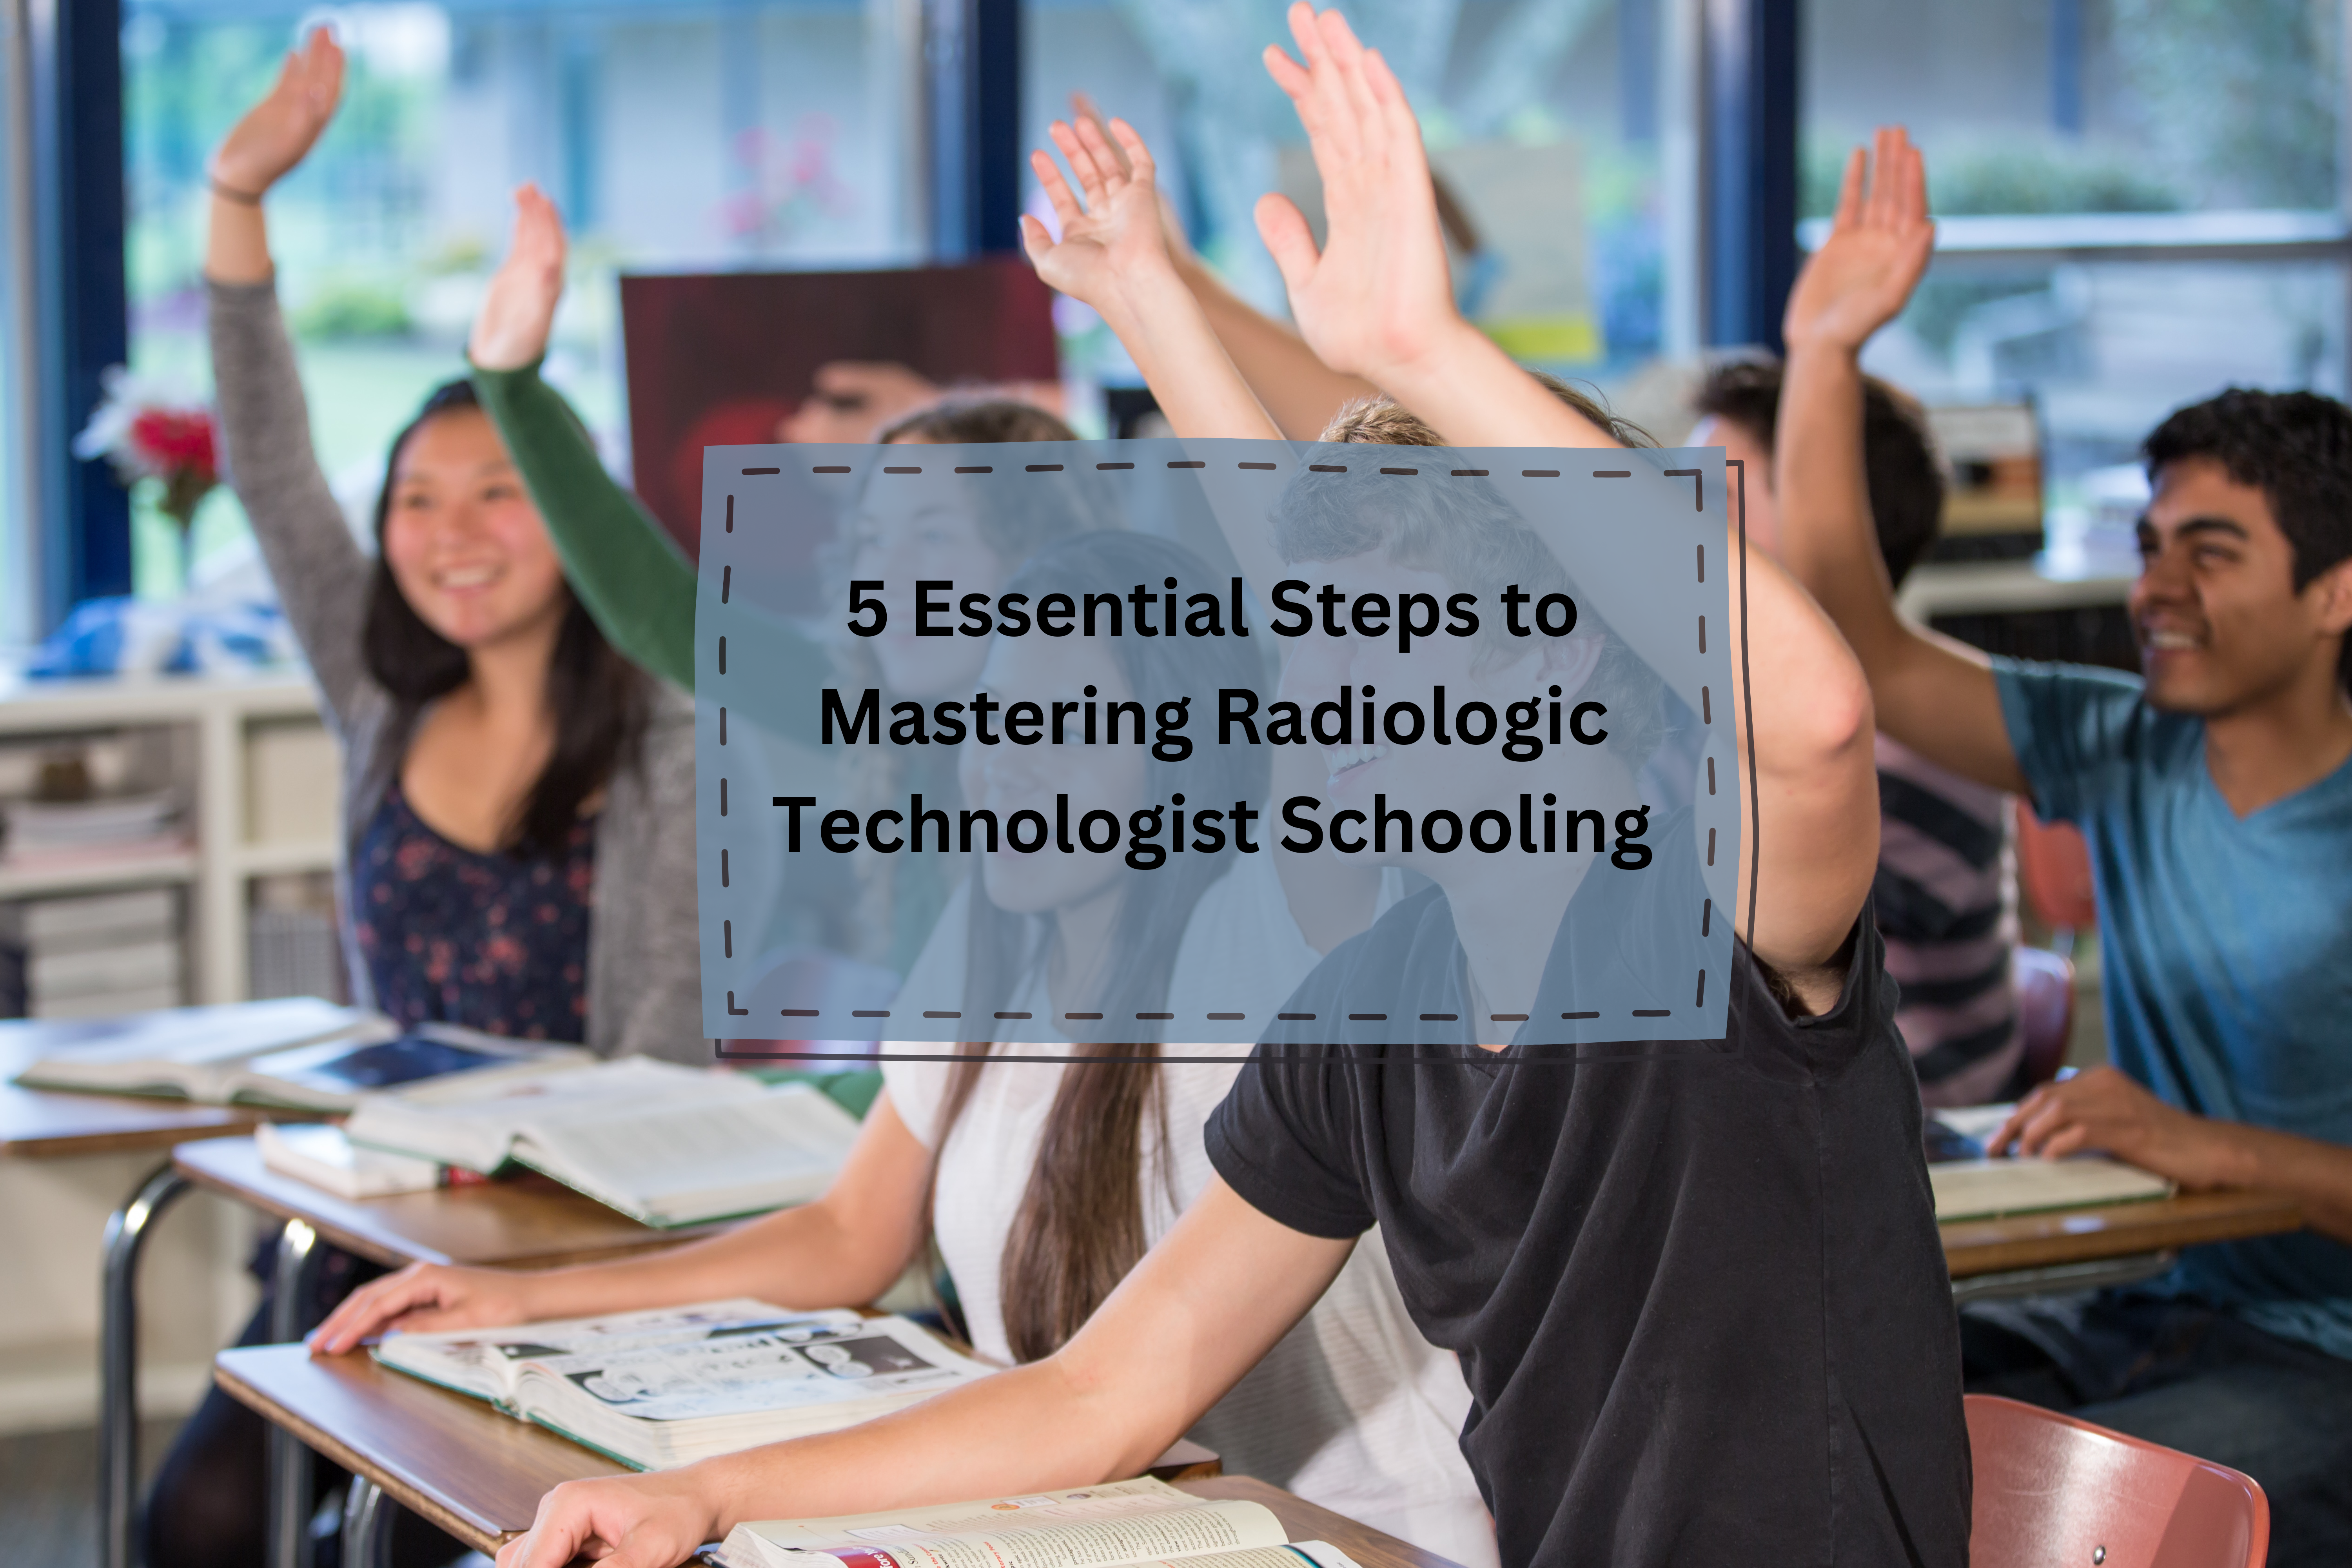 5 Essential Steps to Mastering Radiologic Technologist Schooling